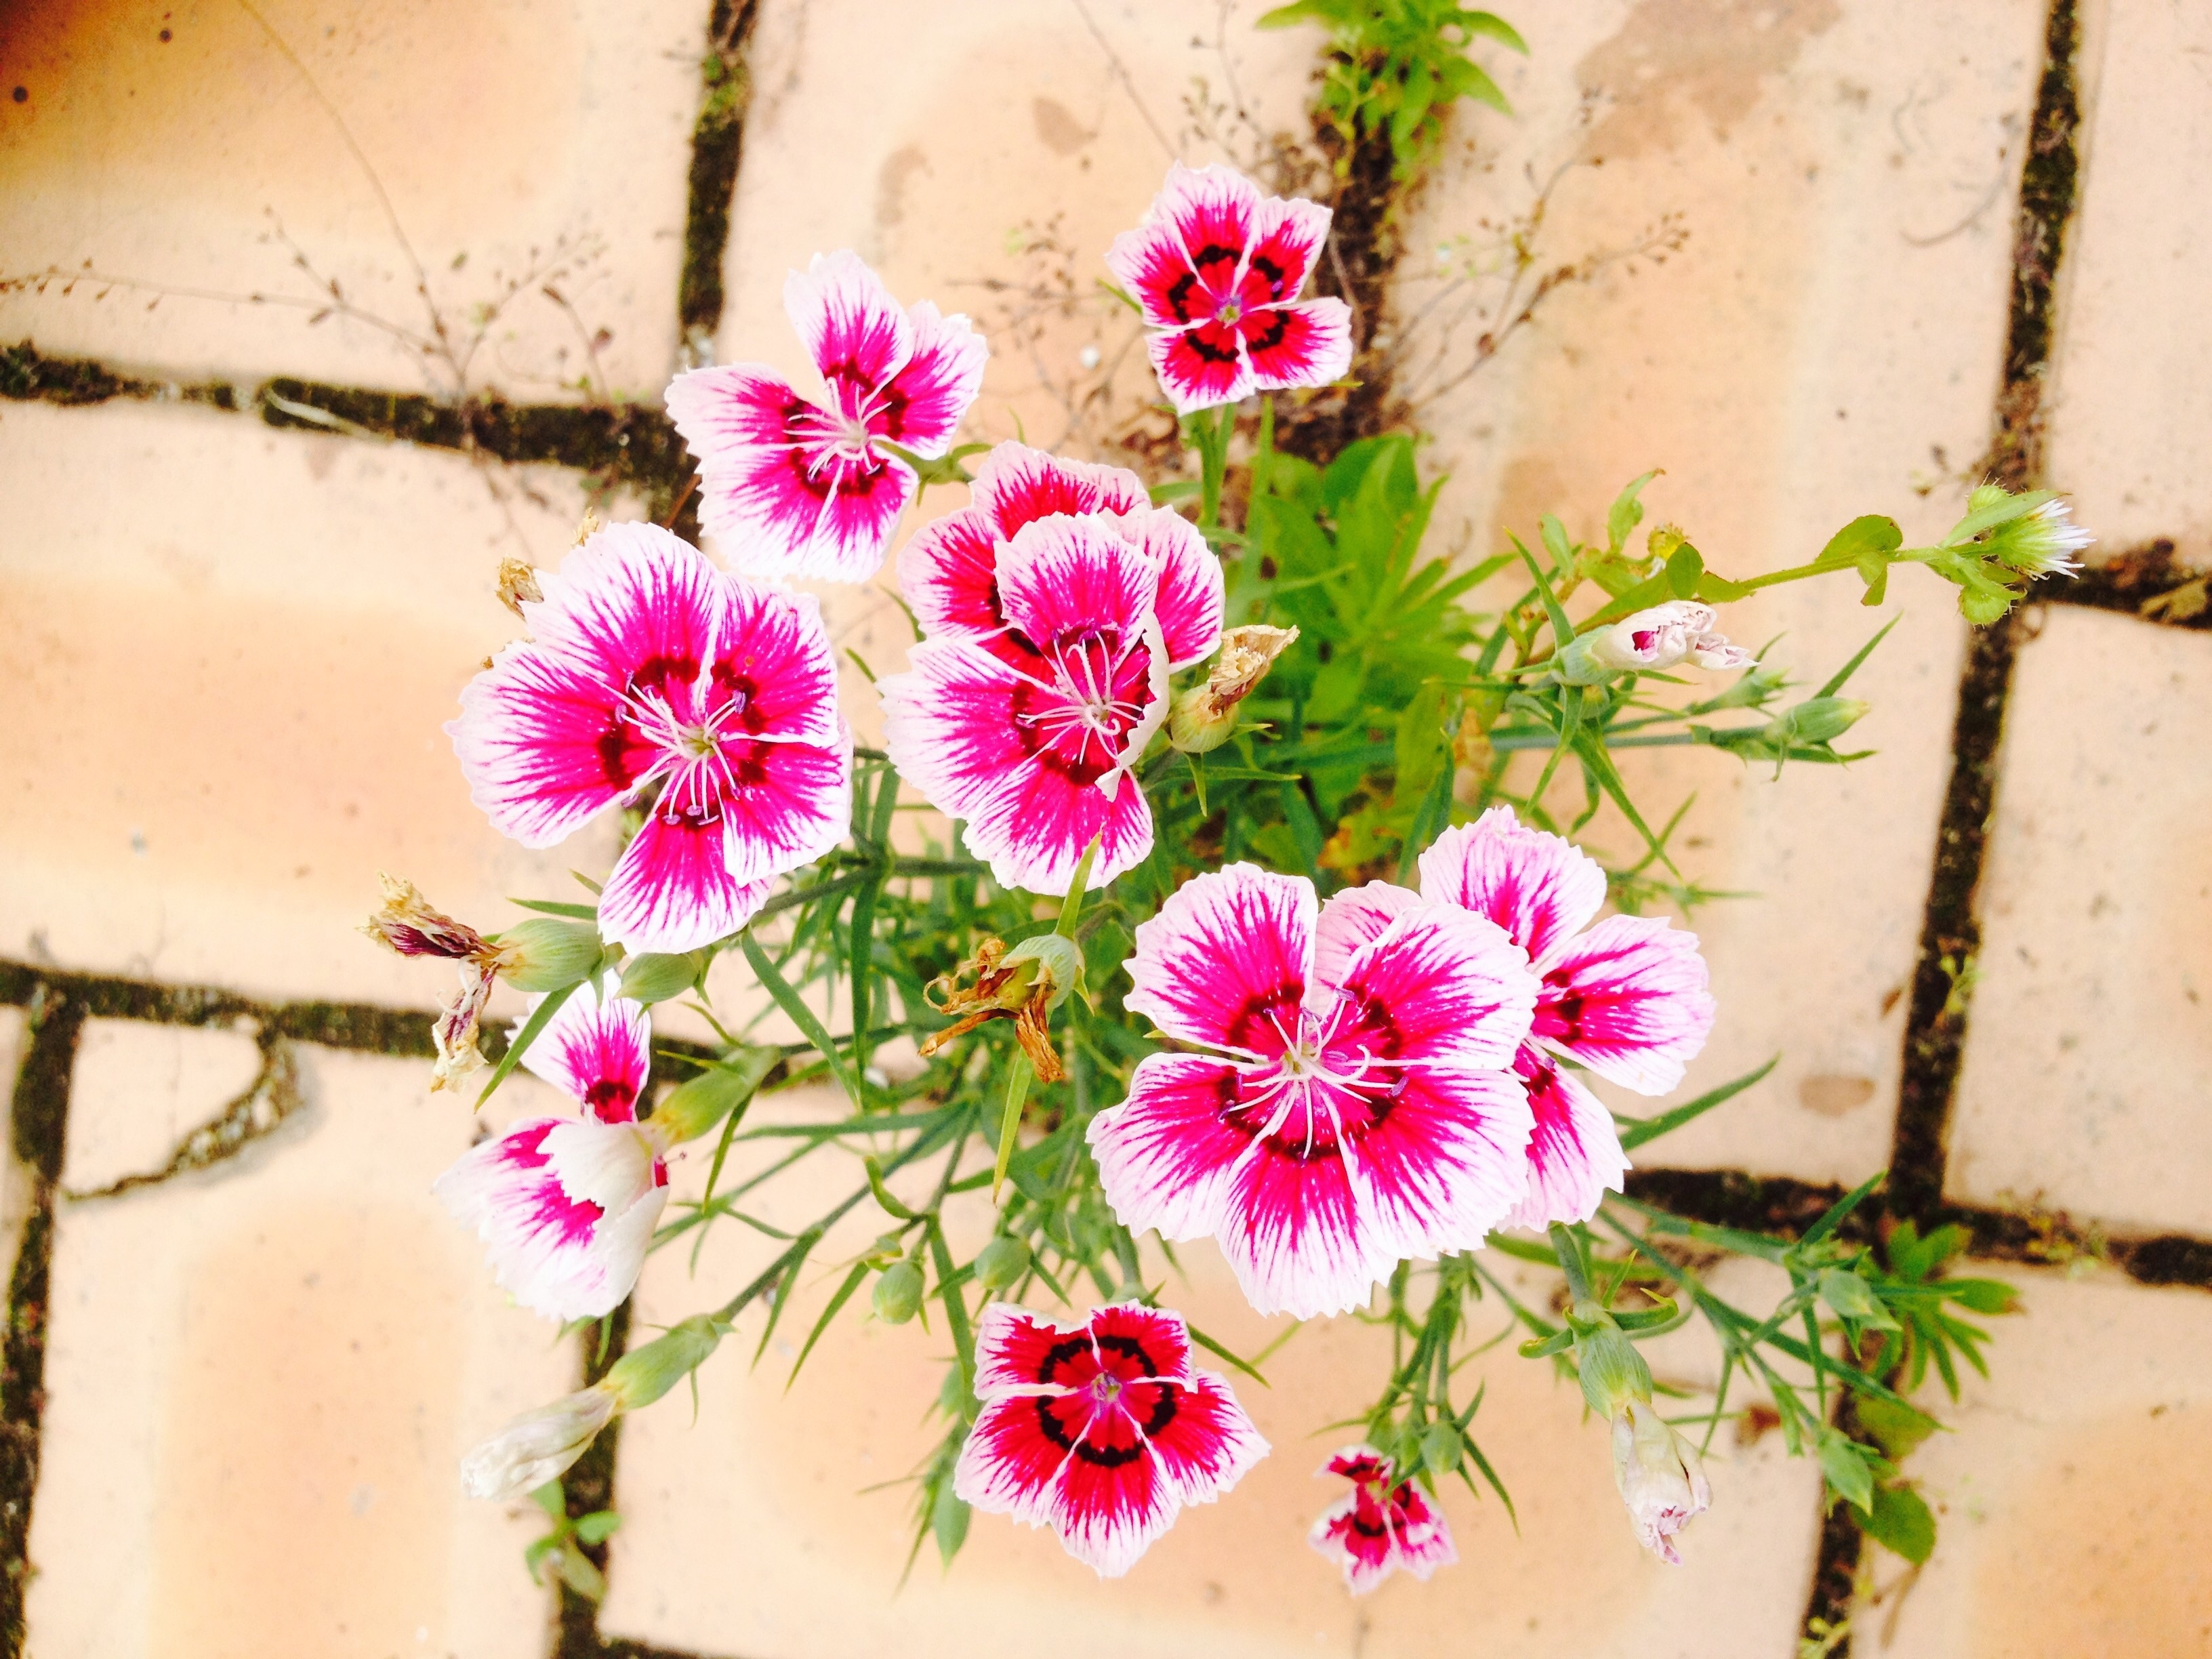 pink and white 5 petaled flowers